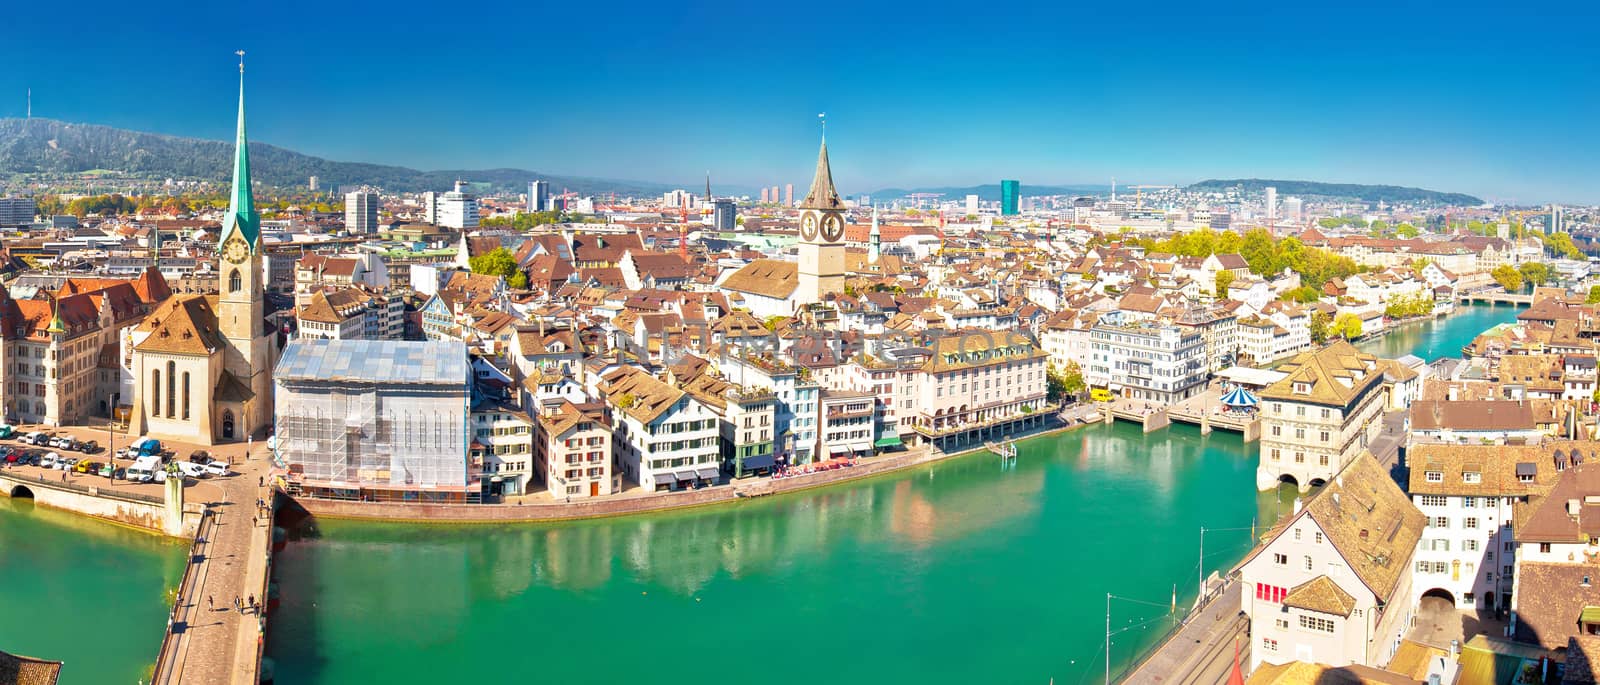 Zurich and Limmat river waterfront aerial panoramic view, largest city in Switzerland